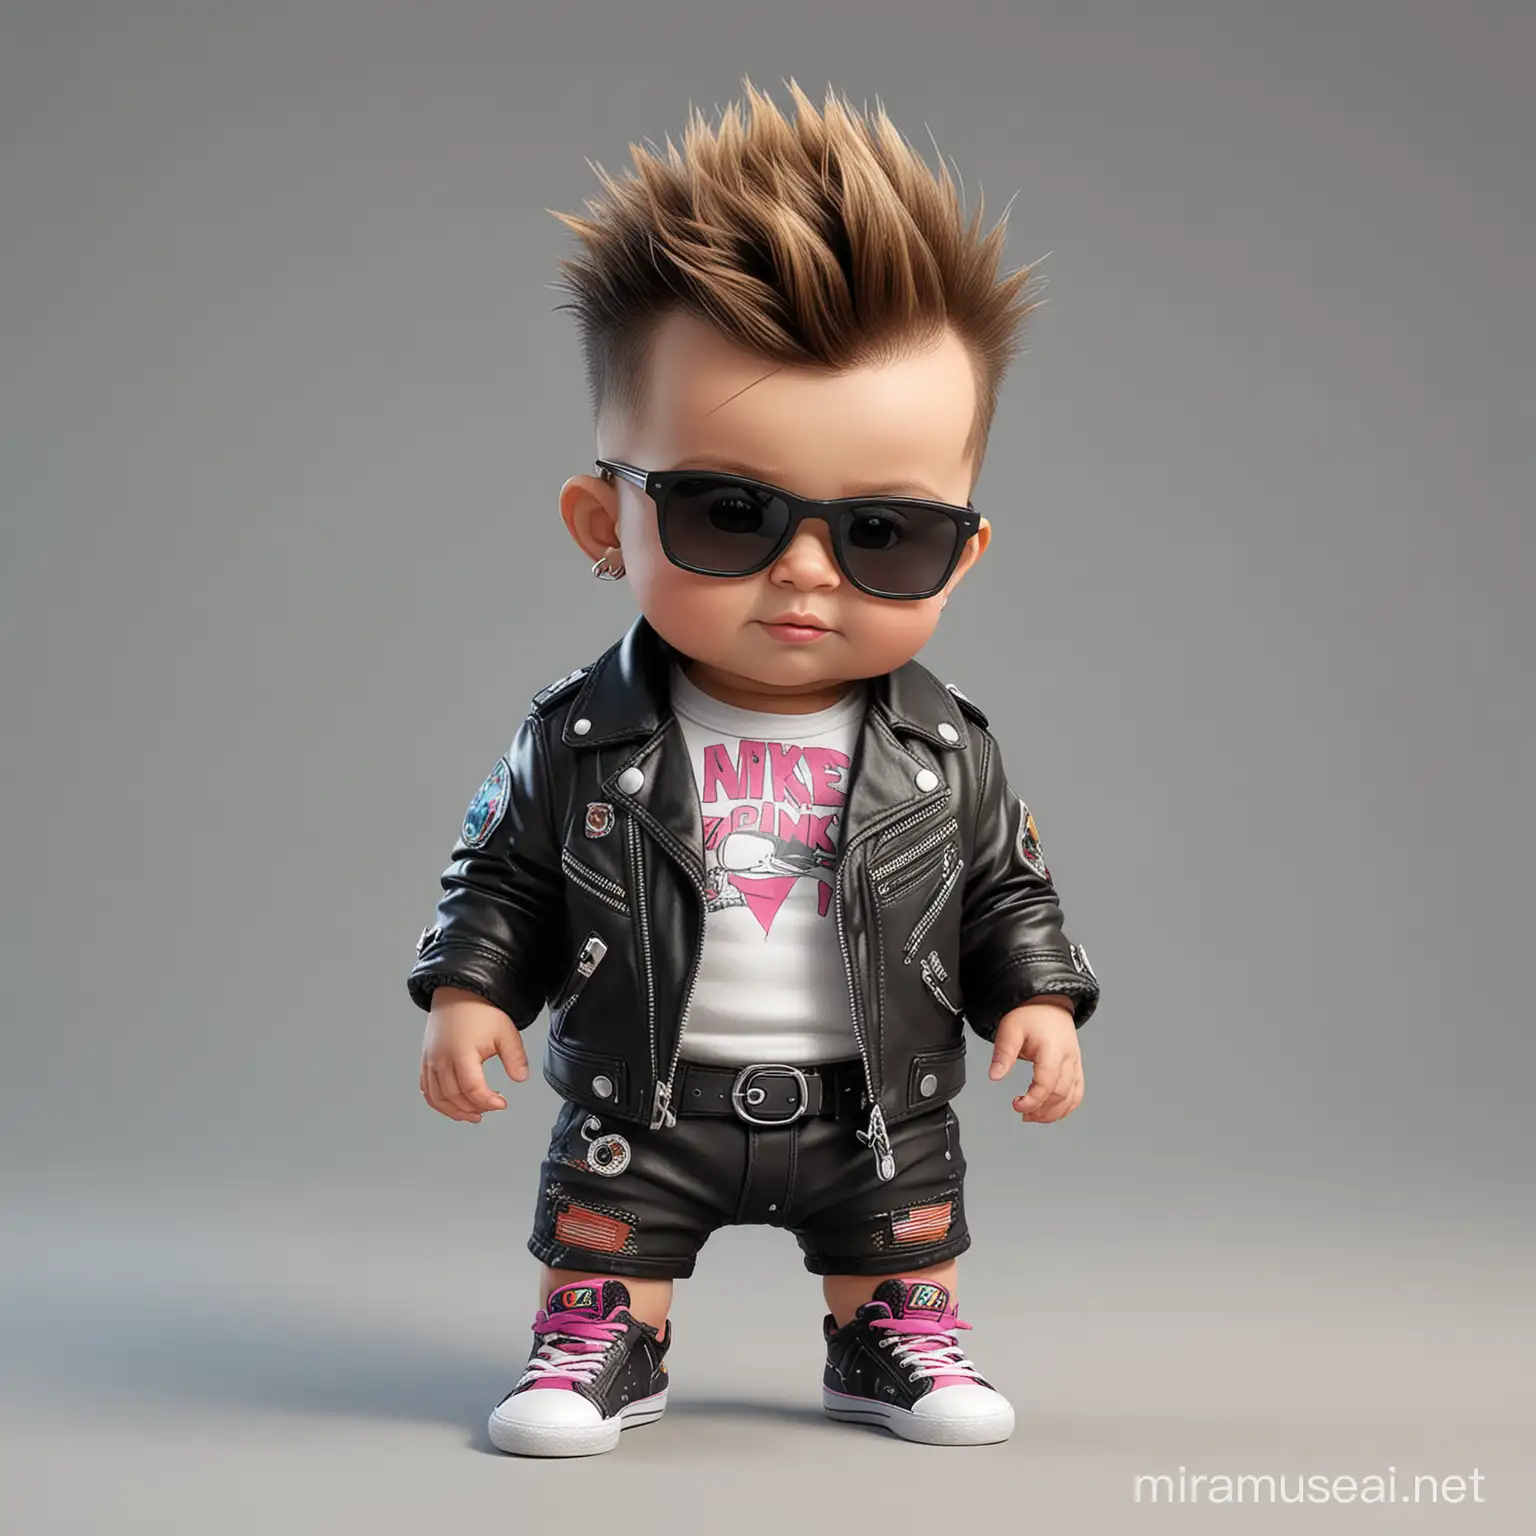 4k Cute cartoon baby punk with sunglasses and colored crest wearing leather jacket and diaper and nike sneakers